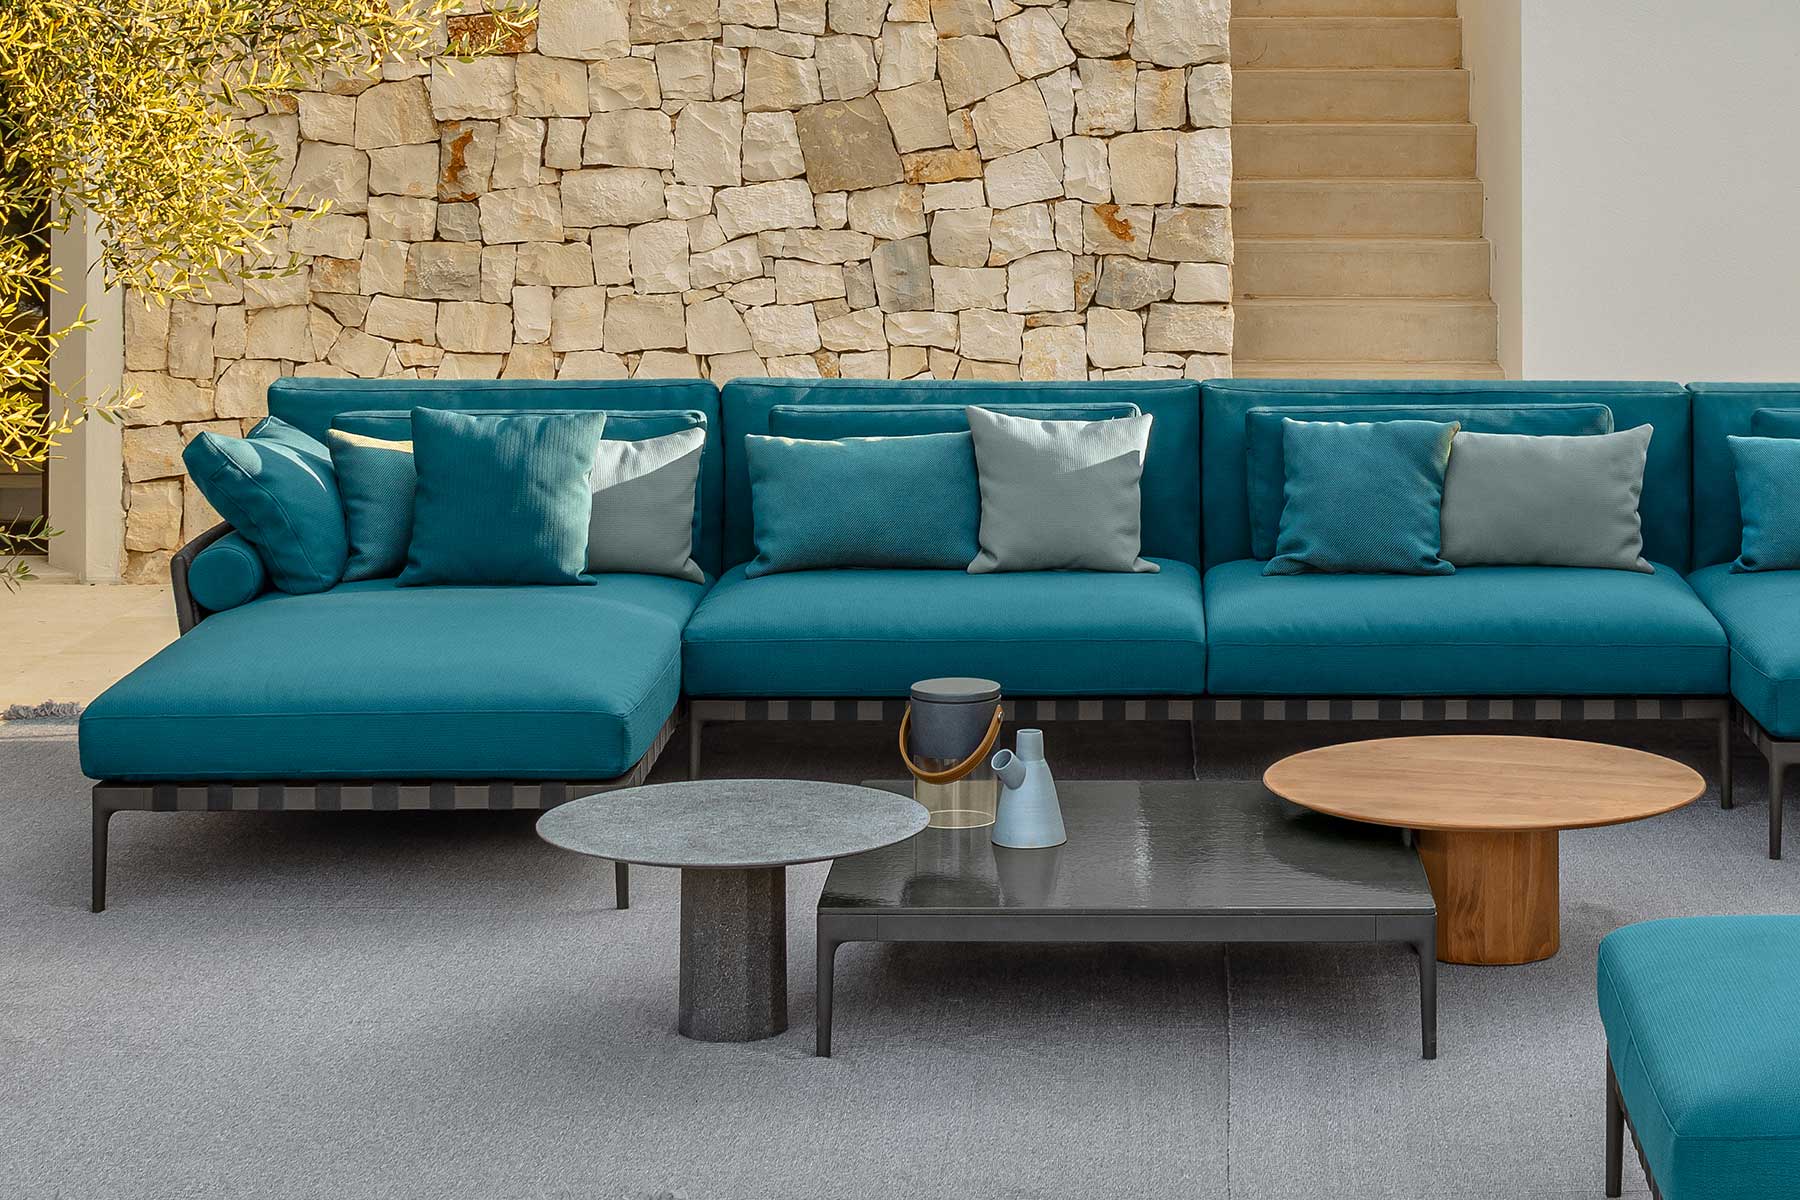 Shop online for your complete new outdoor furniture. Blue garden lounge set (sofa, armchair, coffee table and several outdoor accessories) home delivered.